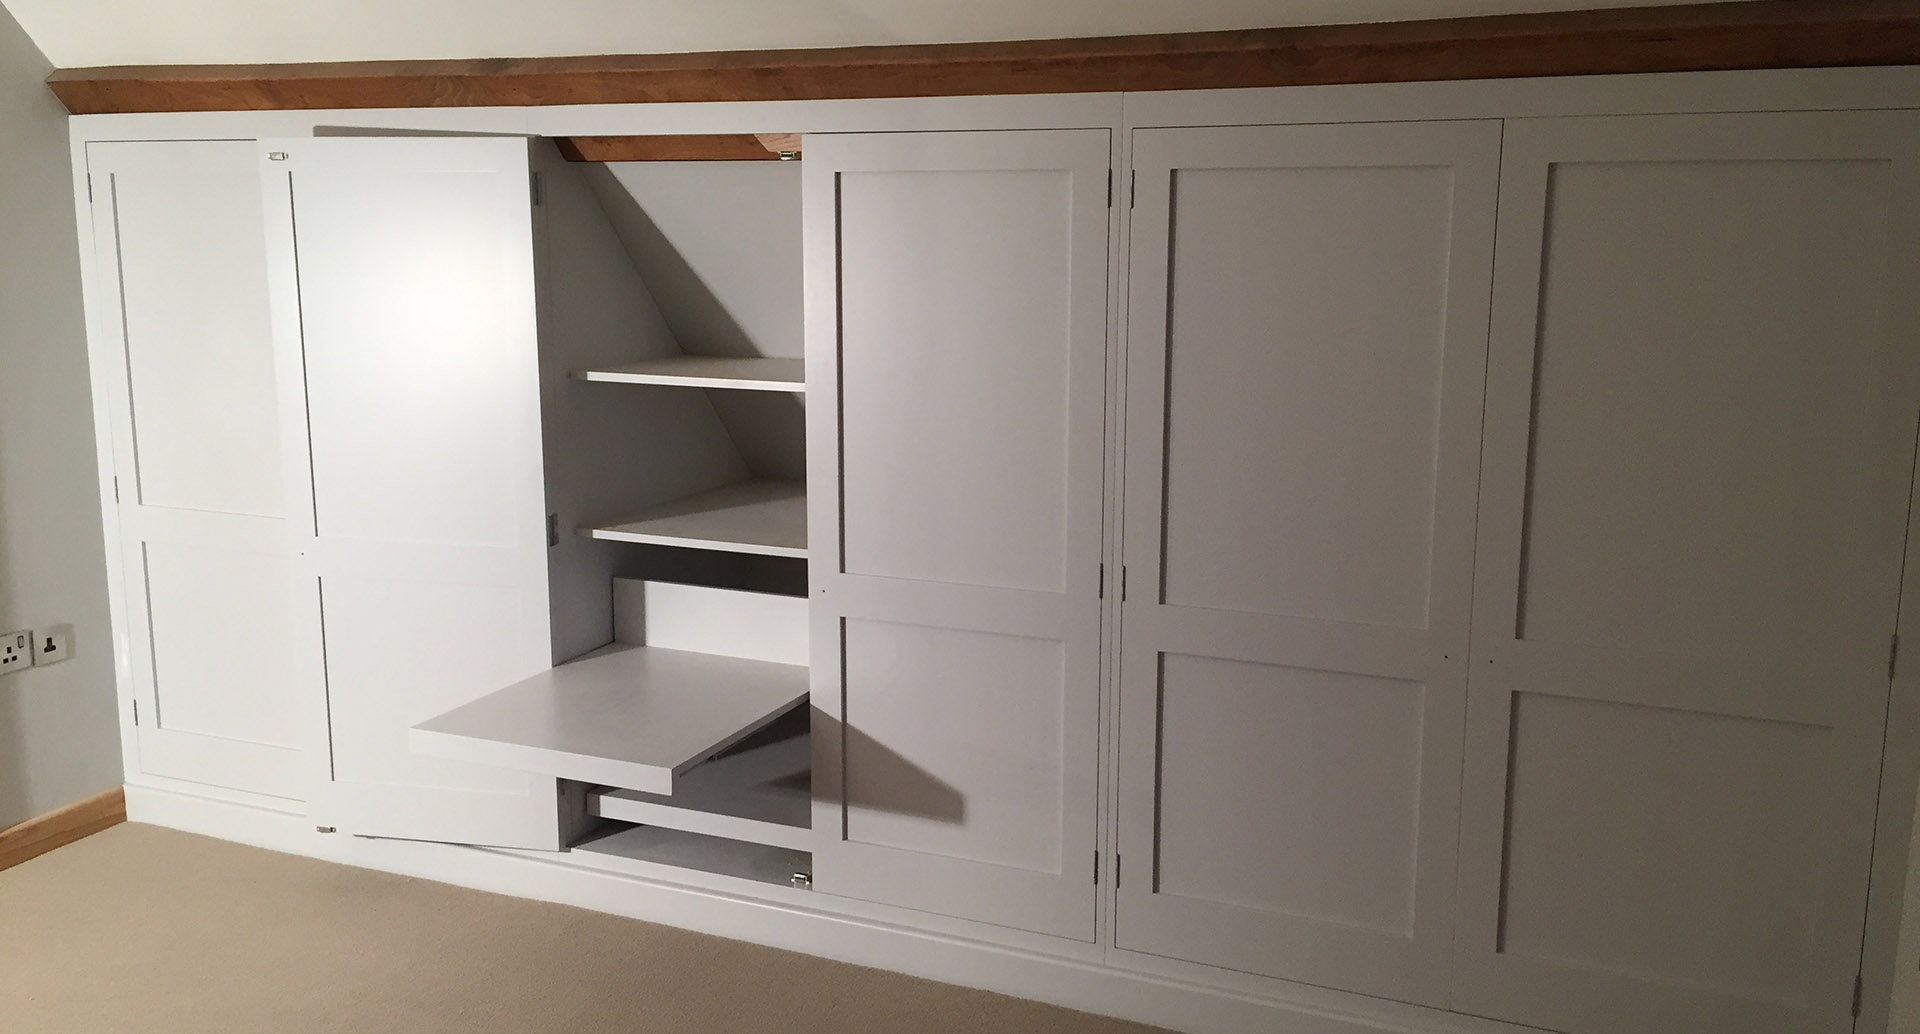 An integrated set of wardrobes with shelves which slide outwards.